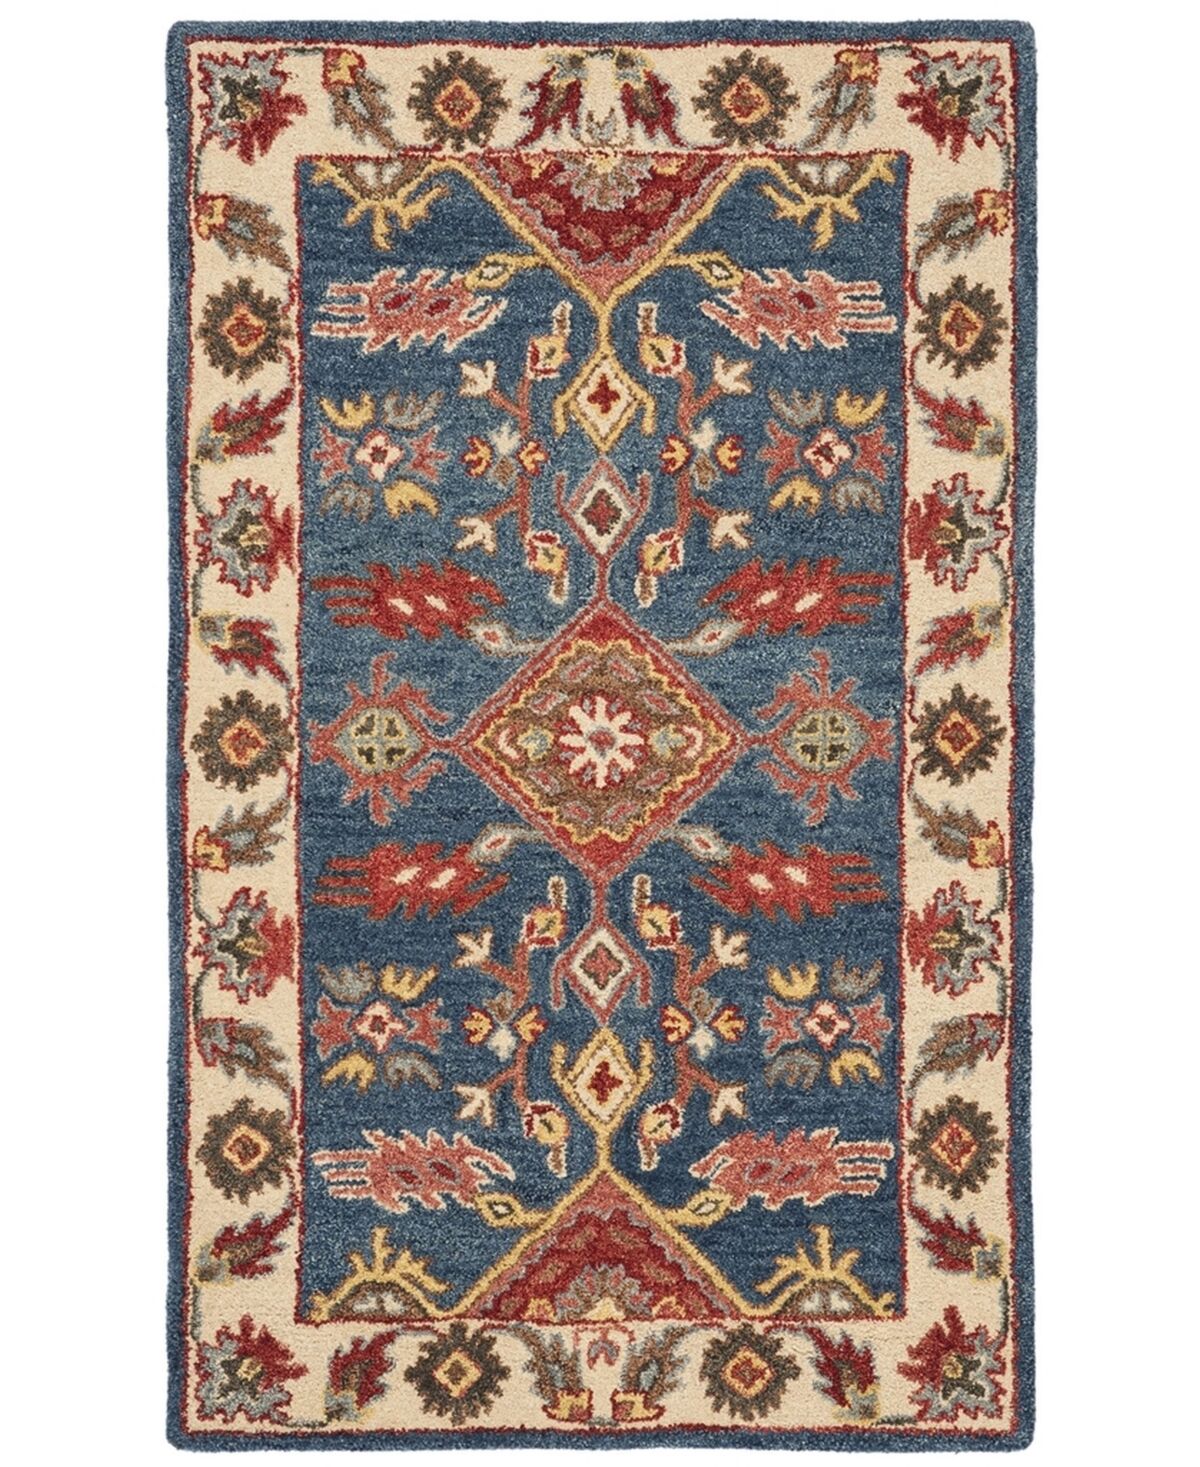 Safavieh Antiquity At506 Blue and Red 4' x 6' Area Rug - Blue